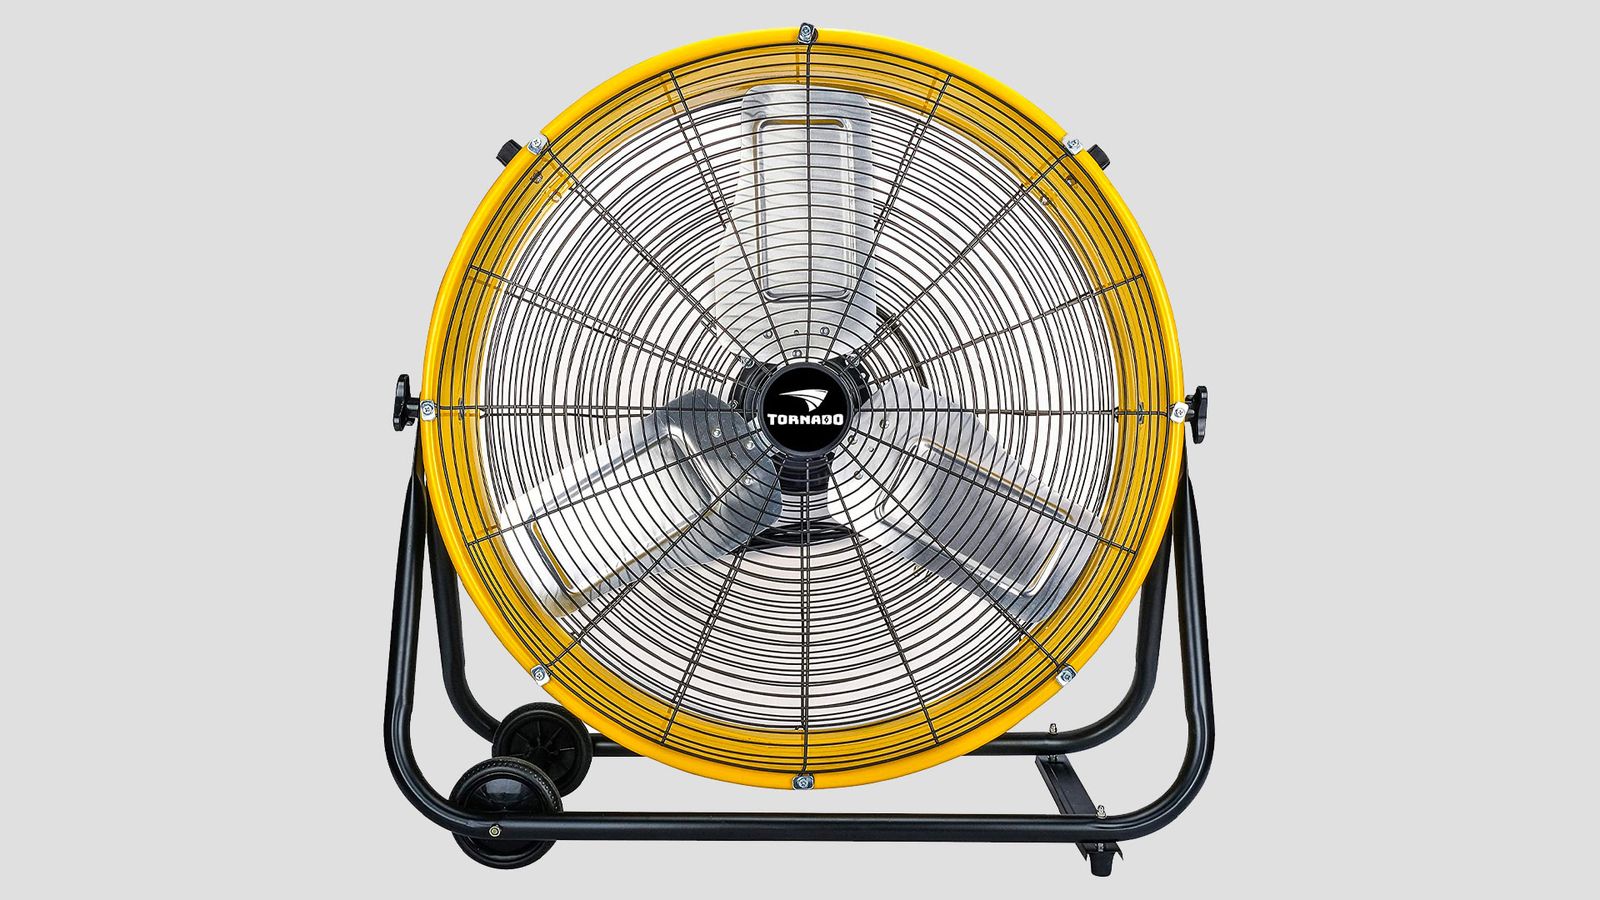 Tornado 8540 CFM product image of a yellow and silver floor fan with a black stand.